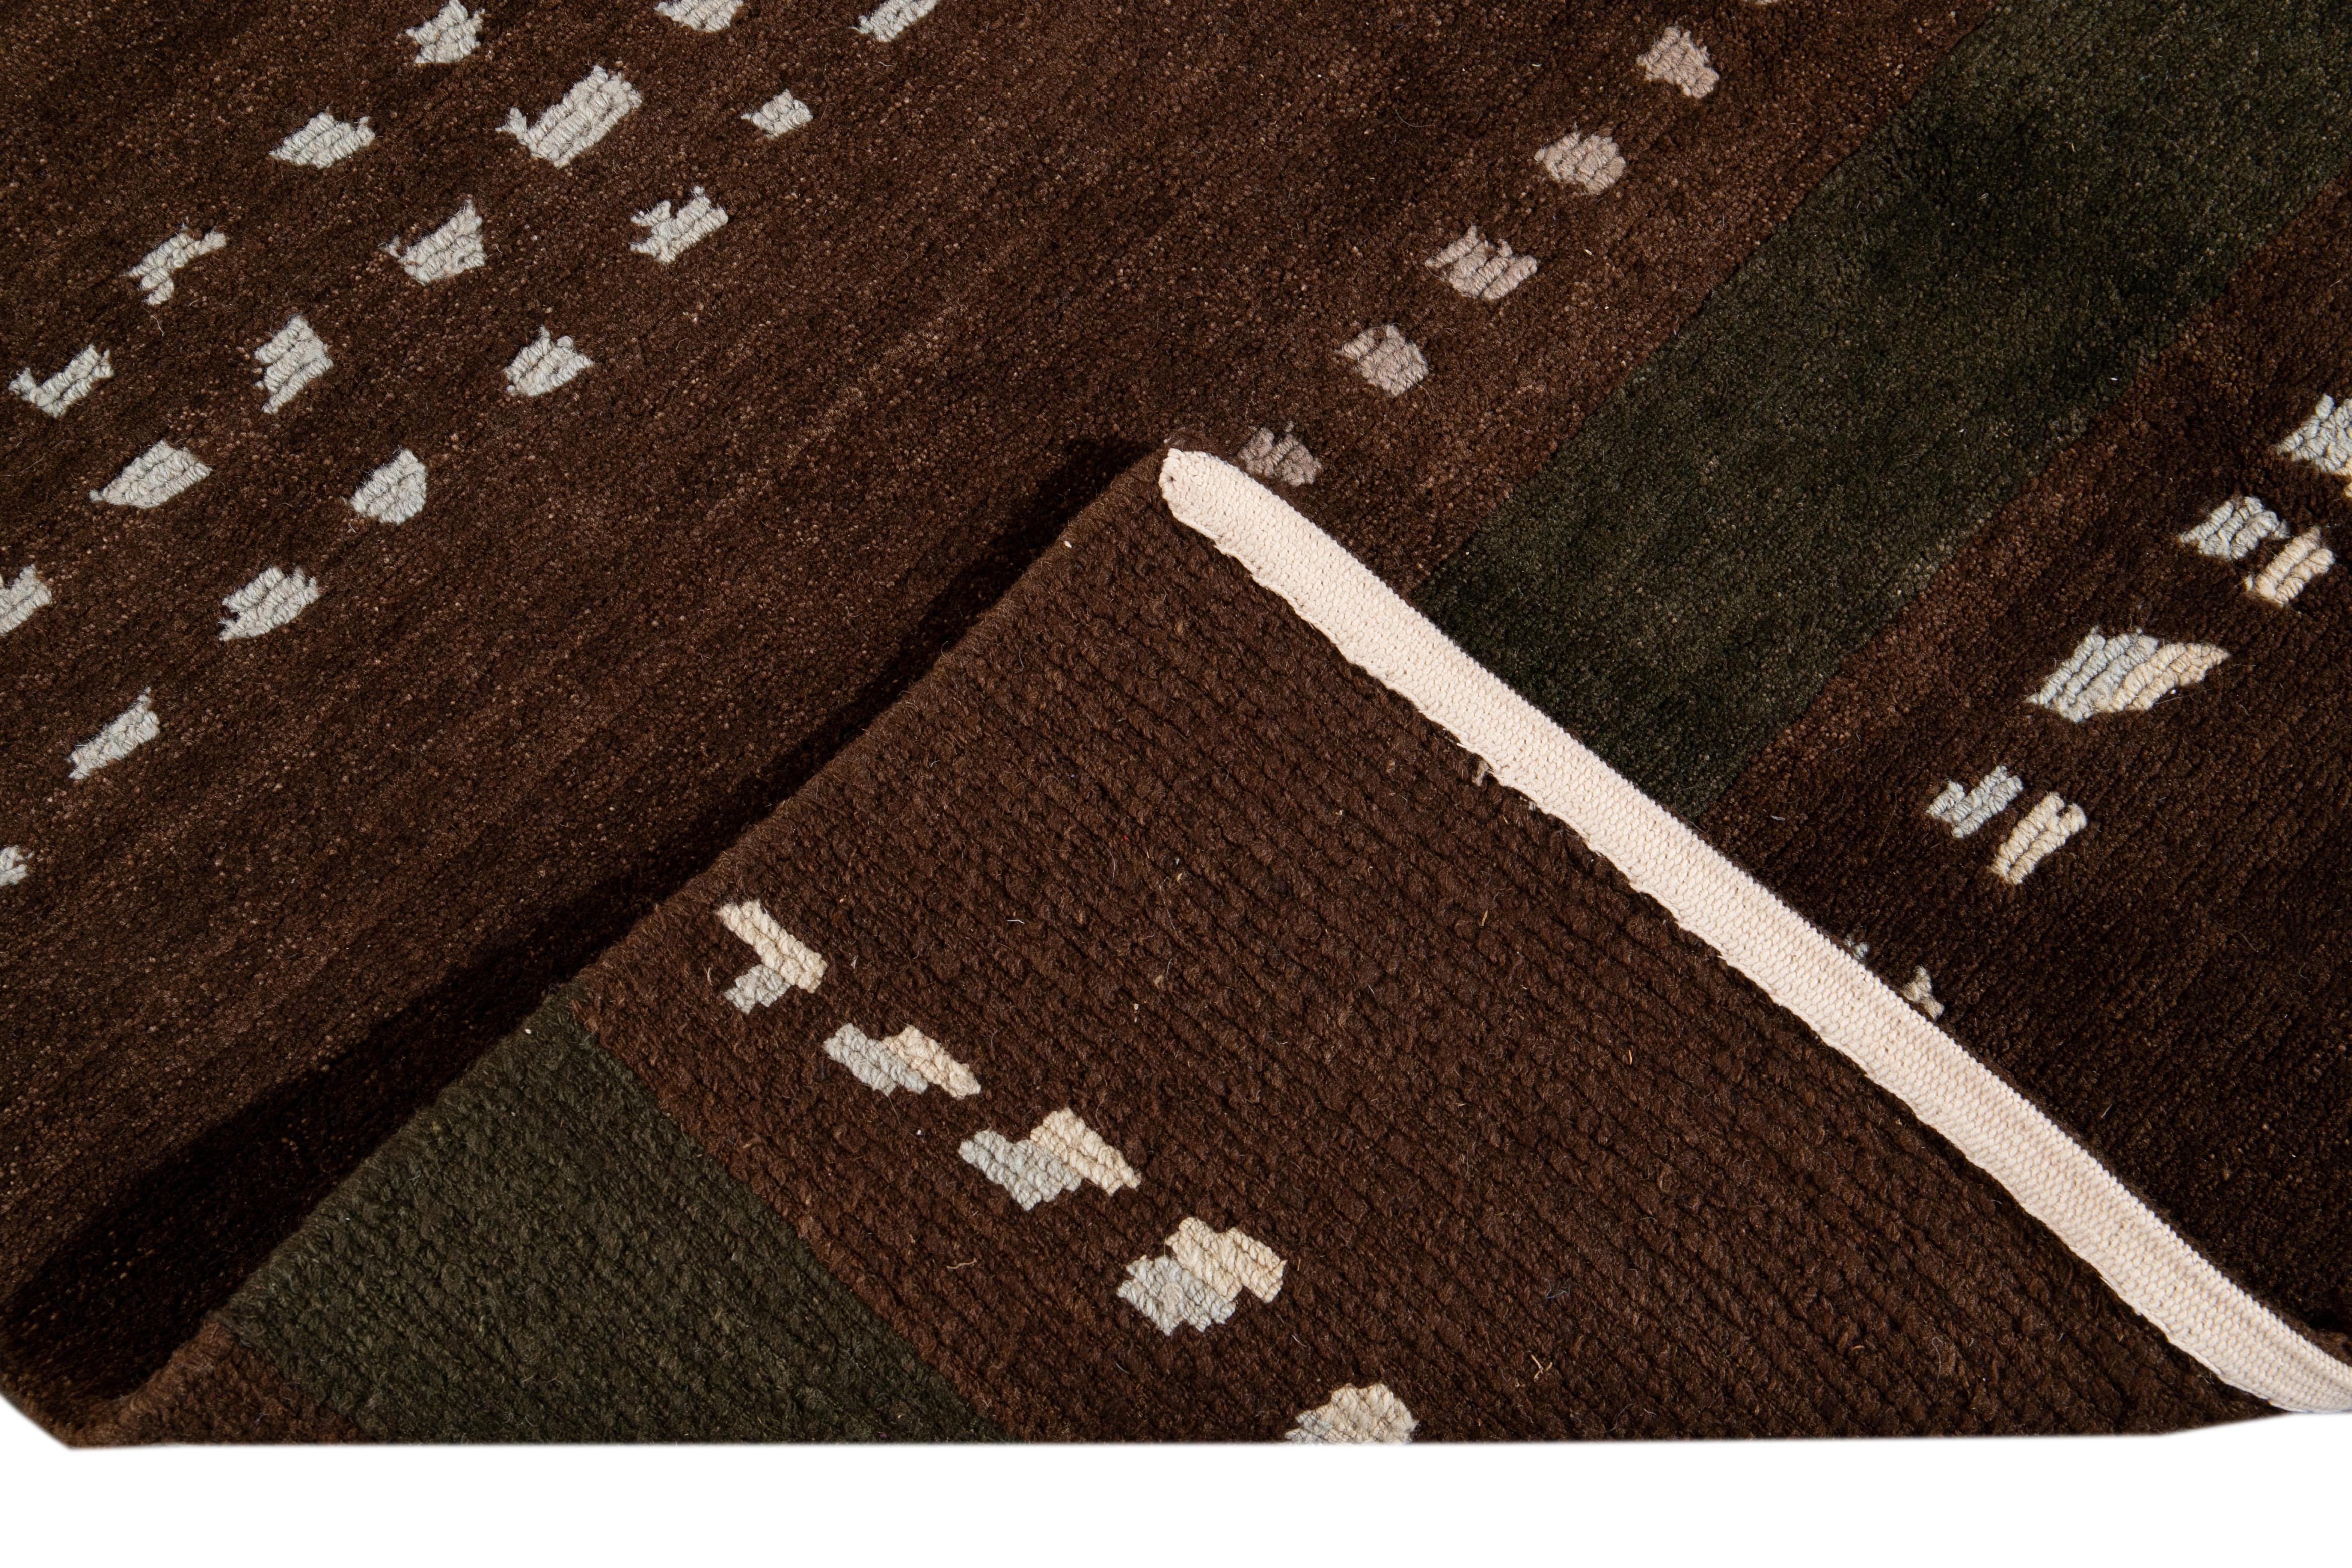 Beautiful modern Tibetan hand knotted Wool rug with a brown field. This Tibetan rug has ivory, beige, and green accents in a gorgeous all-over geometric stripe design.

This rug Measures: 8' x 10'.